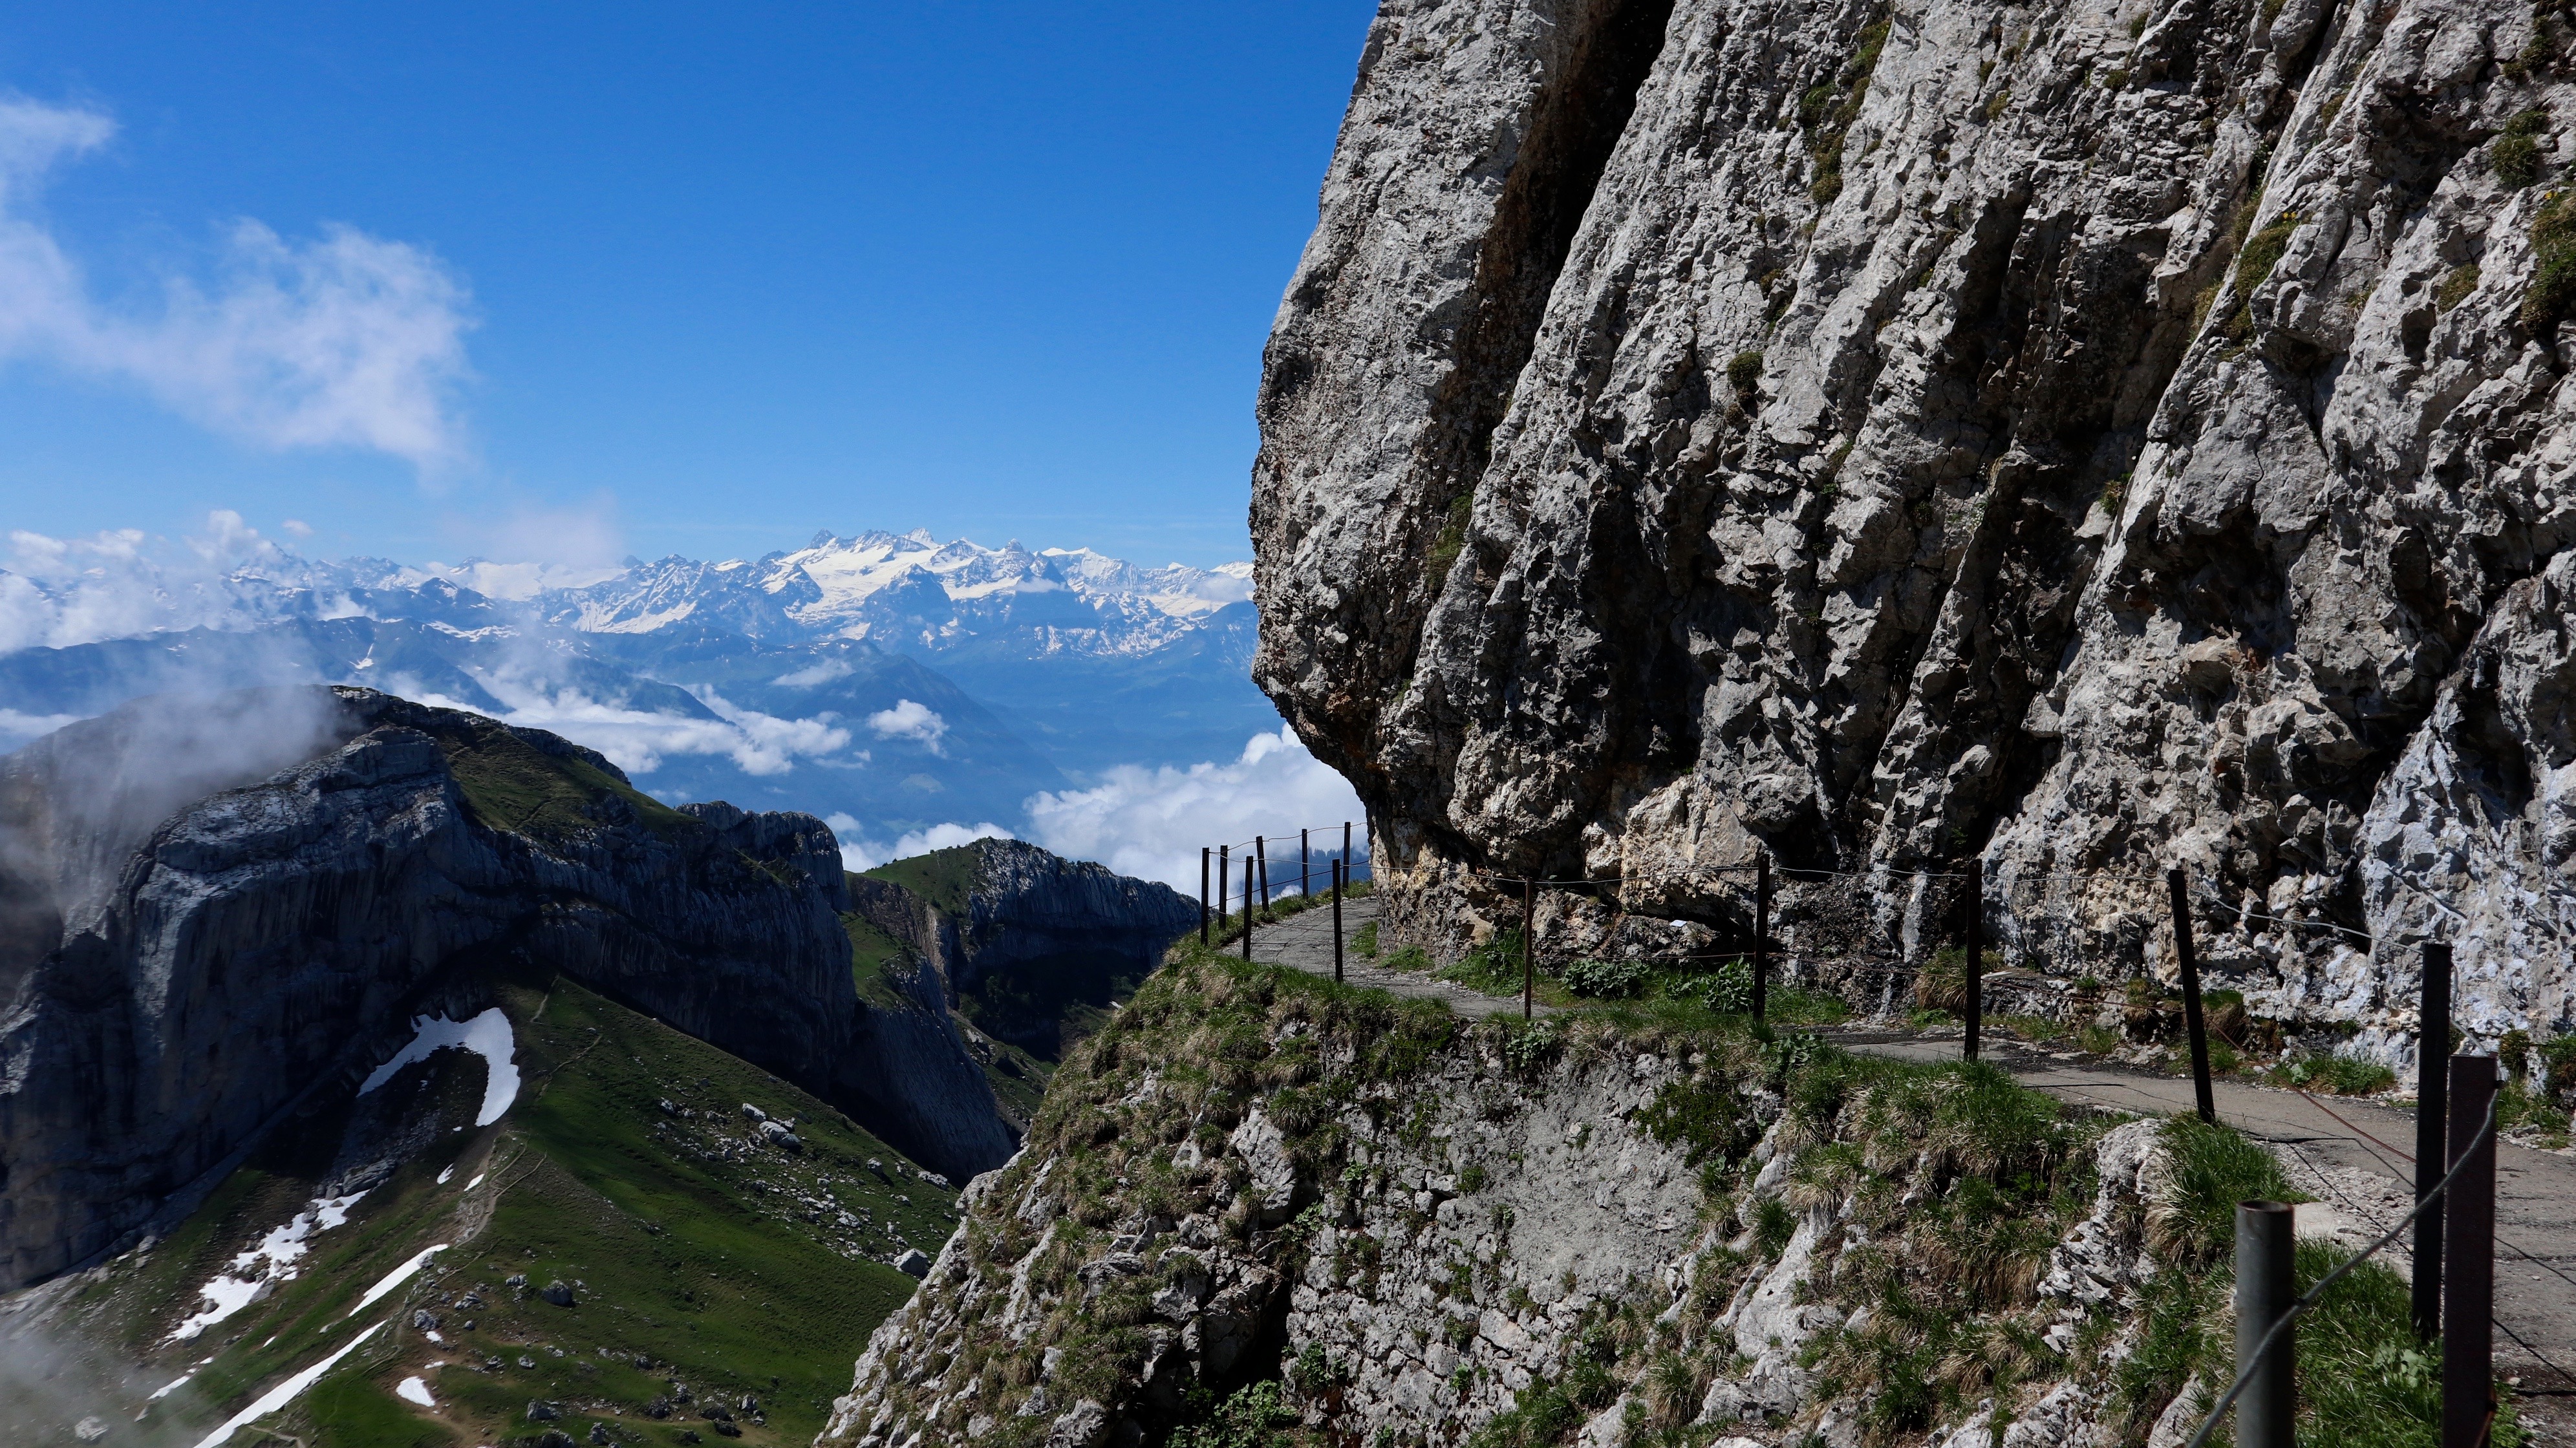 Hiking trail at the top of Mount Pilatus